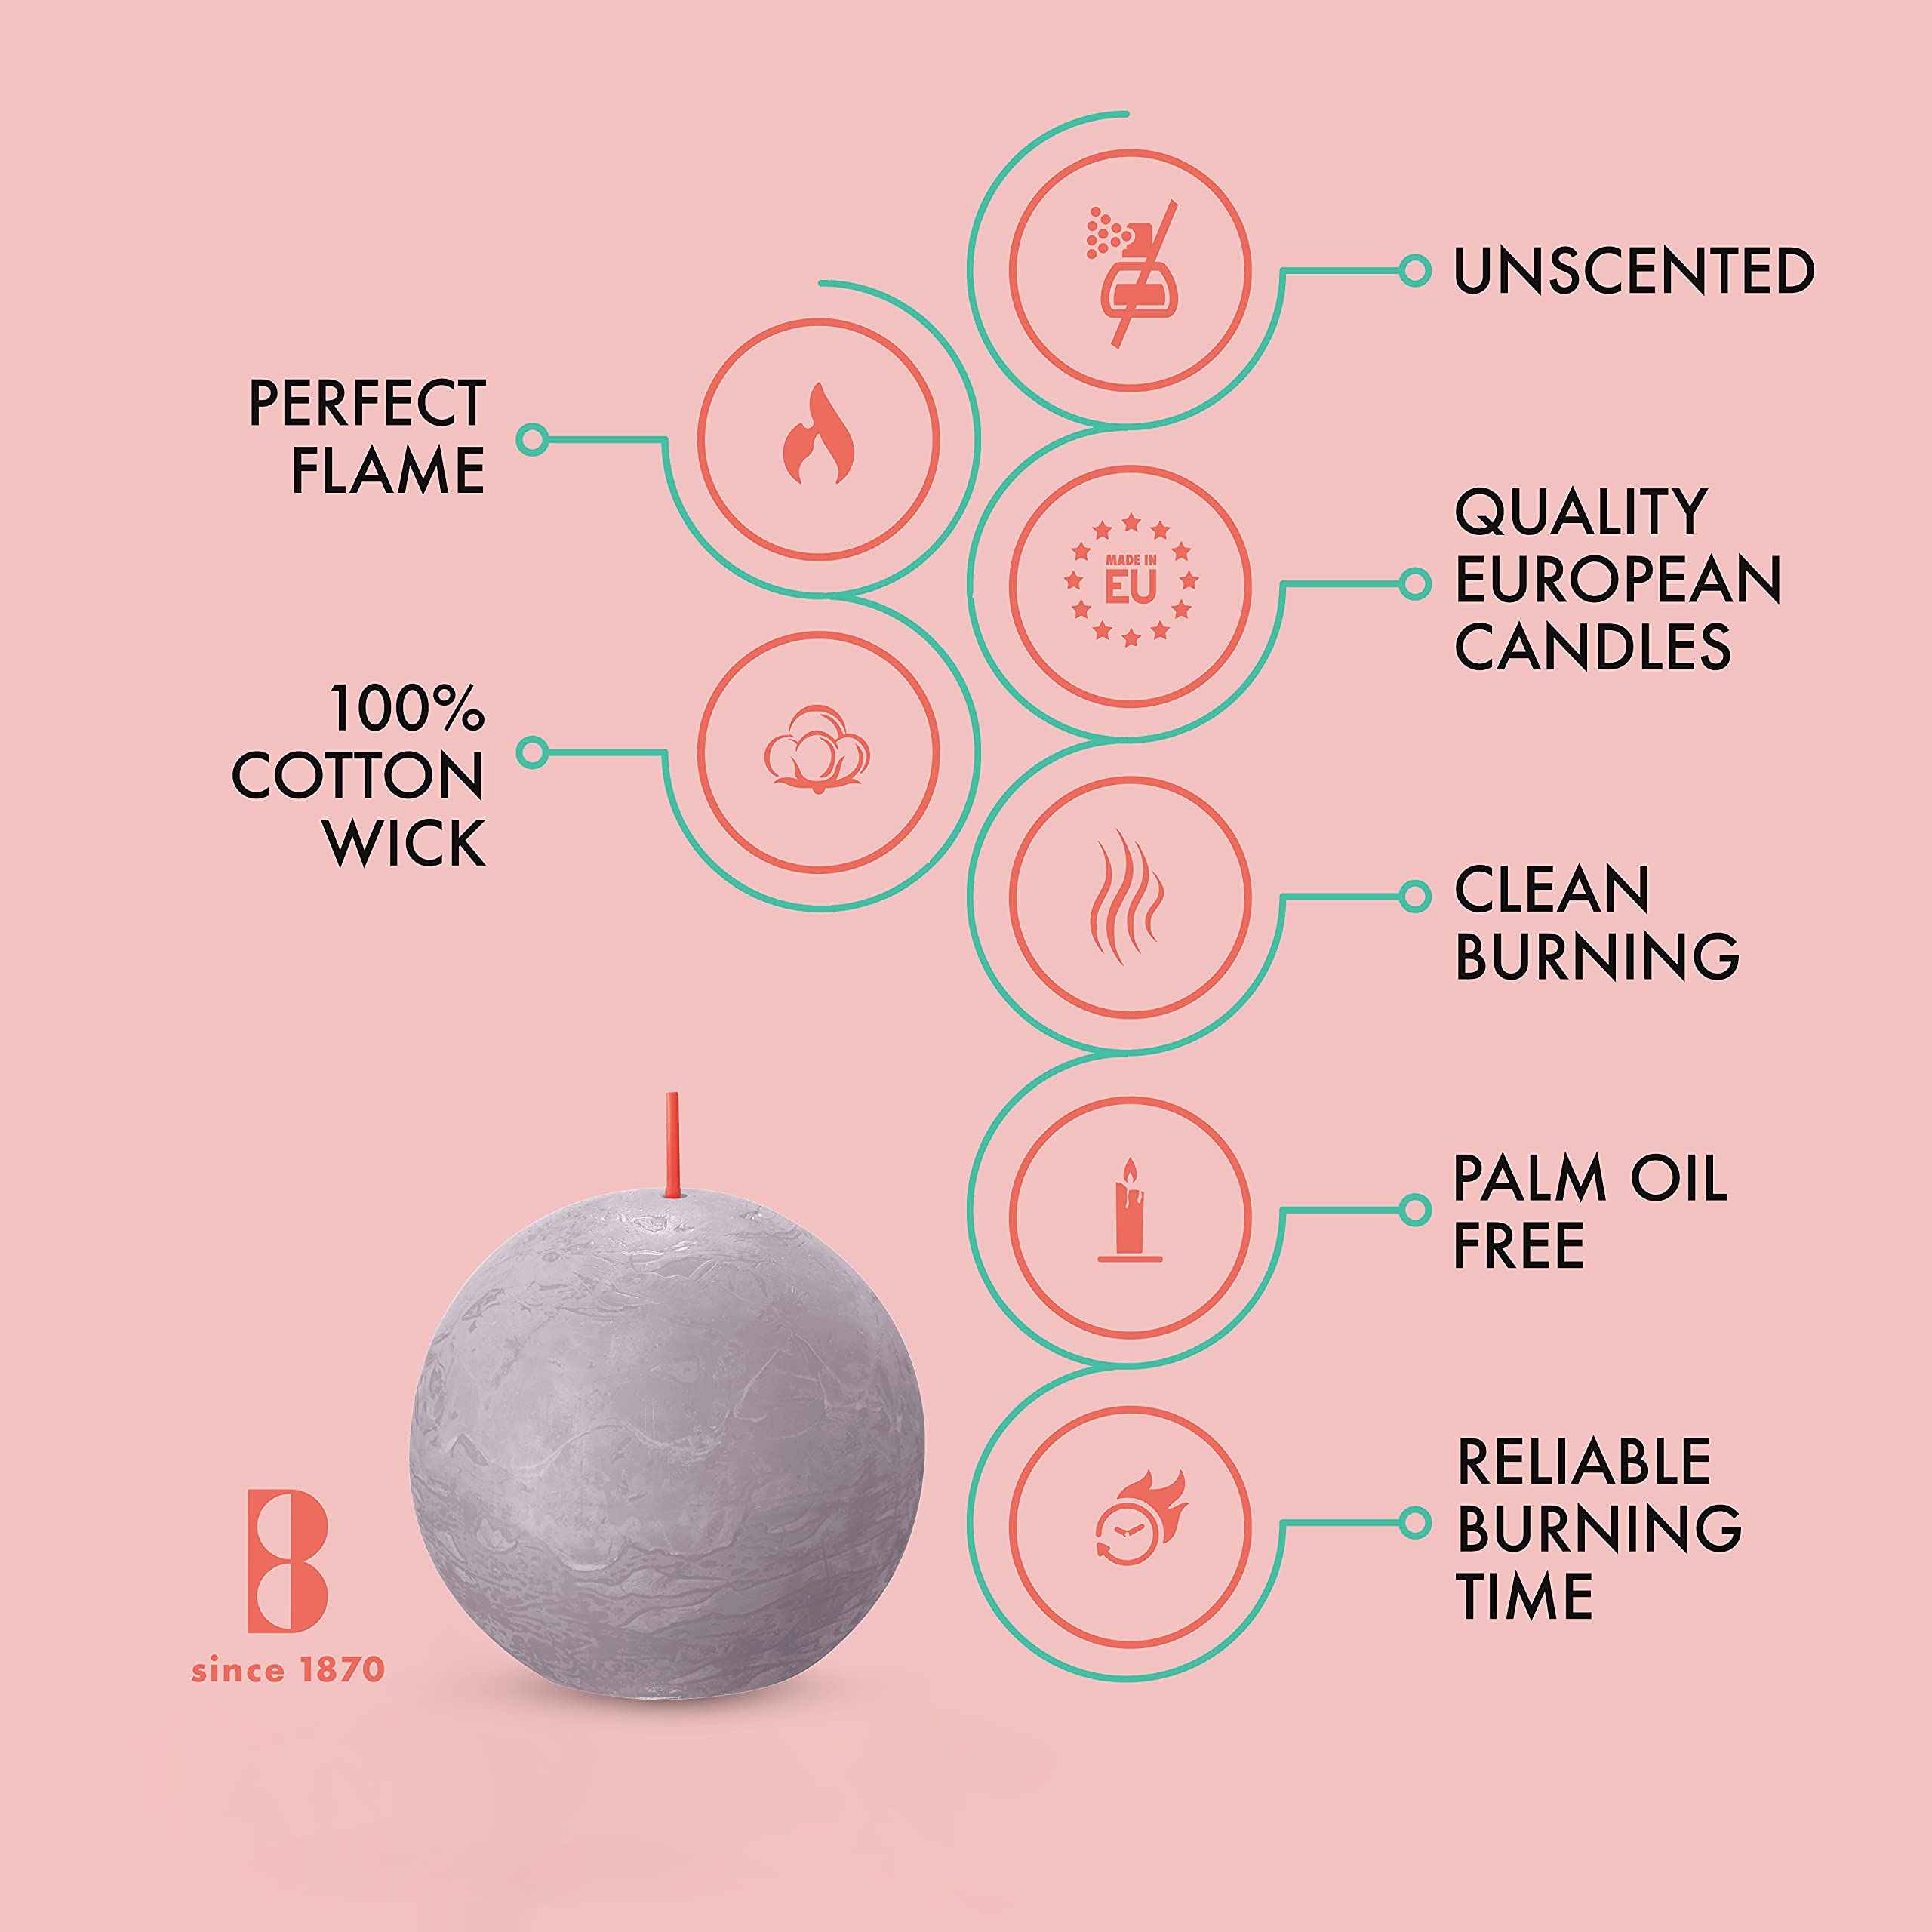 BOLSIUS 3 Pack Frosted Lavender Rustic Ball Pillar Candles - 3 Inch - Premium European Quality - Includes Natural Plant-Based Wax - Unscented Dripless Smokeless 25 Hour Party D�cor Candles  - Collectible Very Good